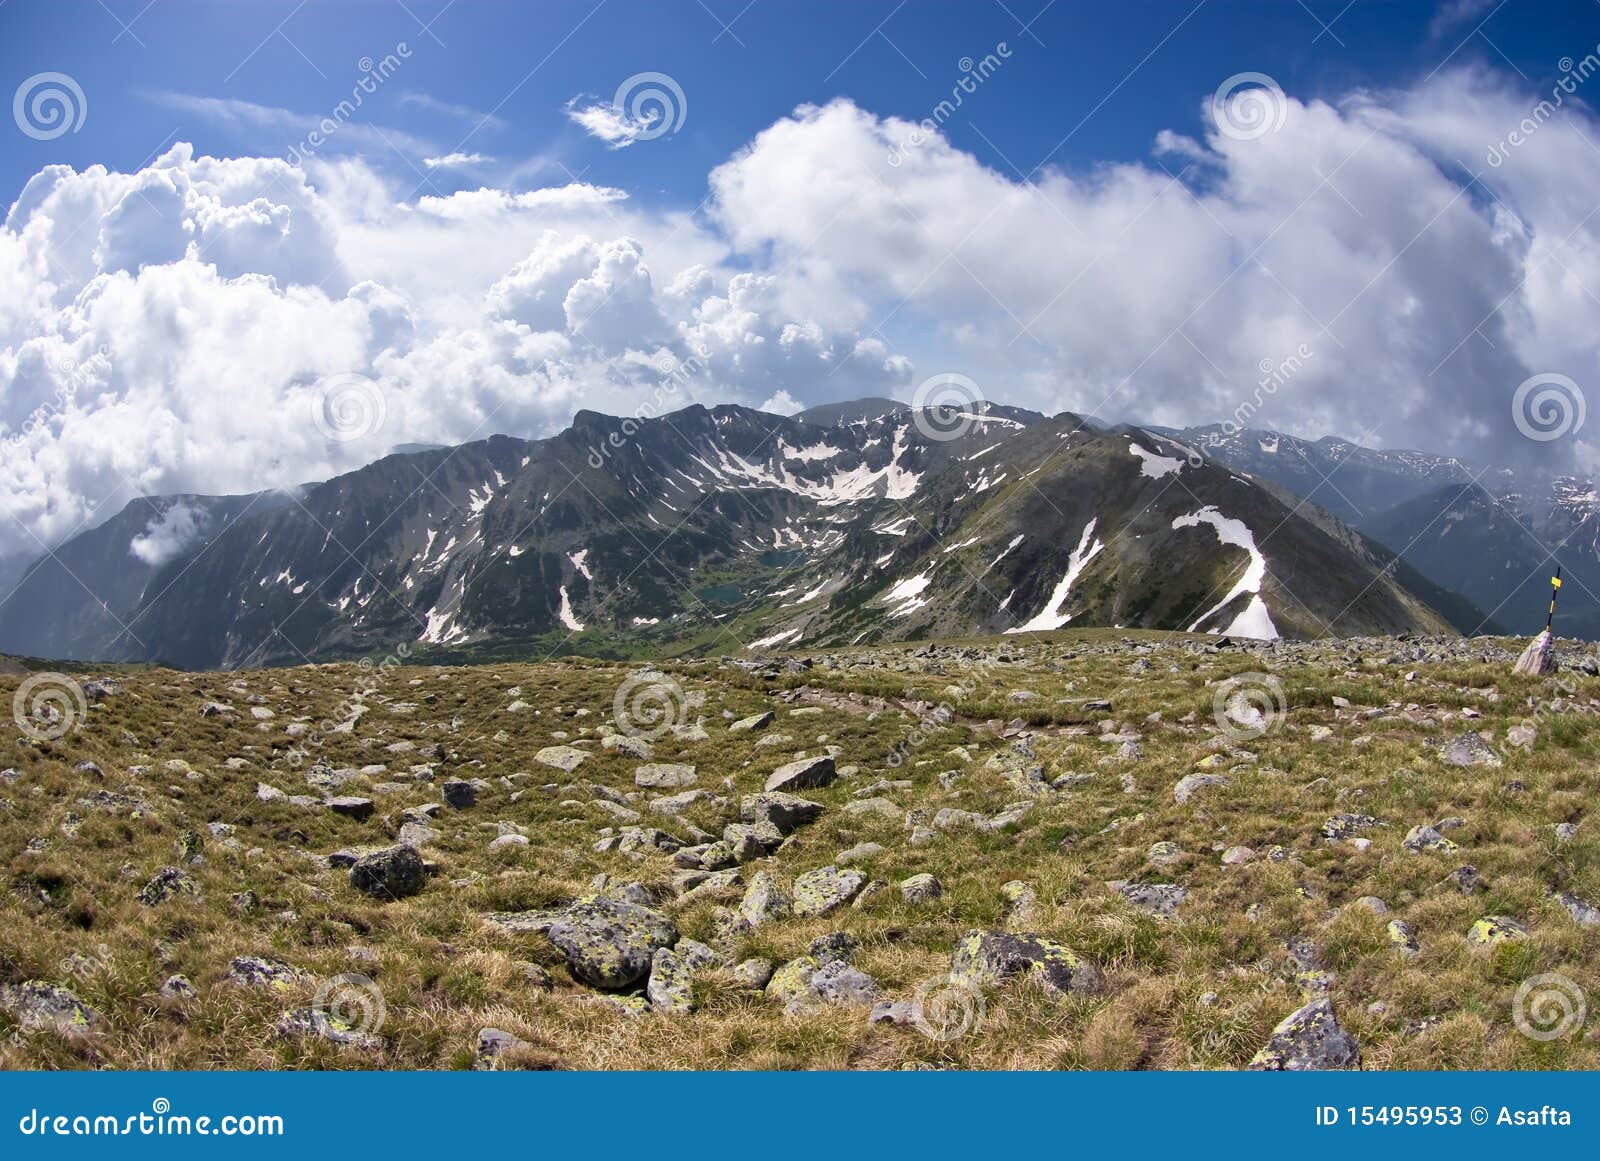 Mountain View stock image. Image of outdoor, background - 15495953